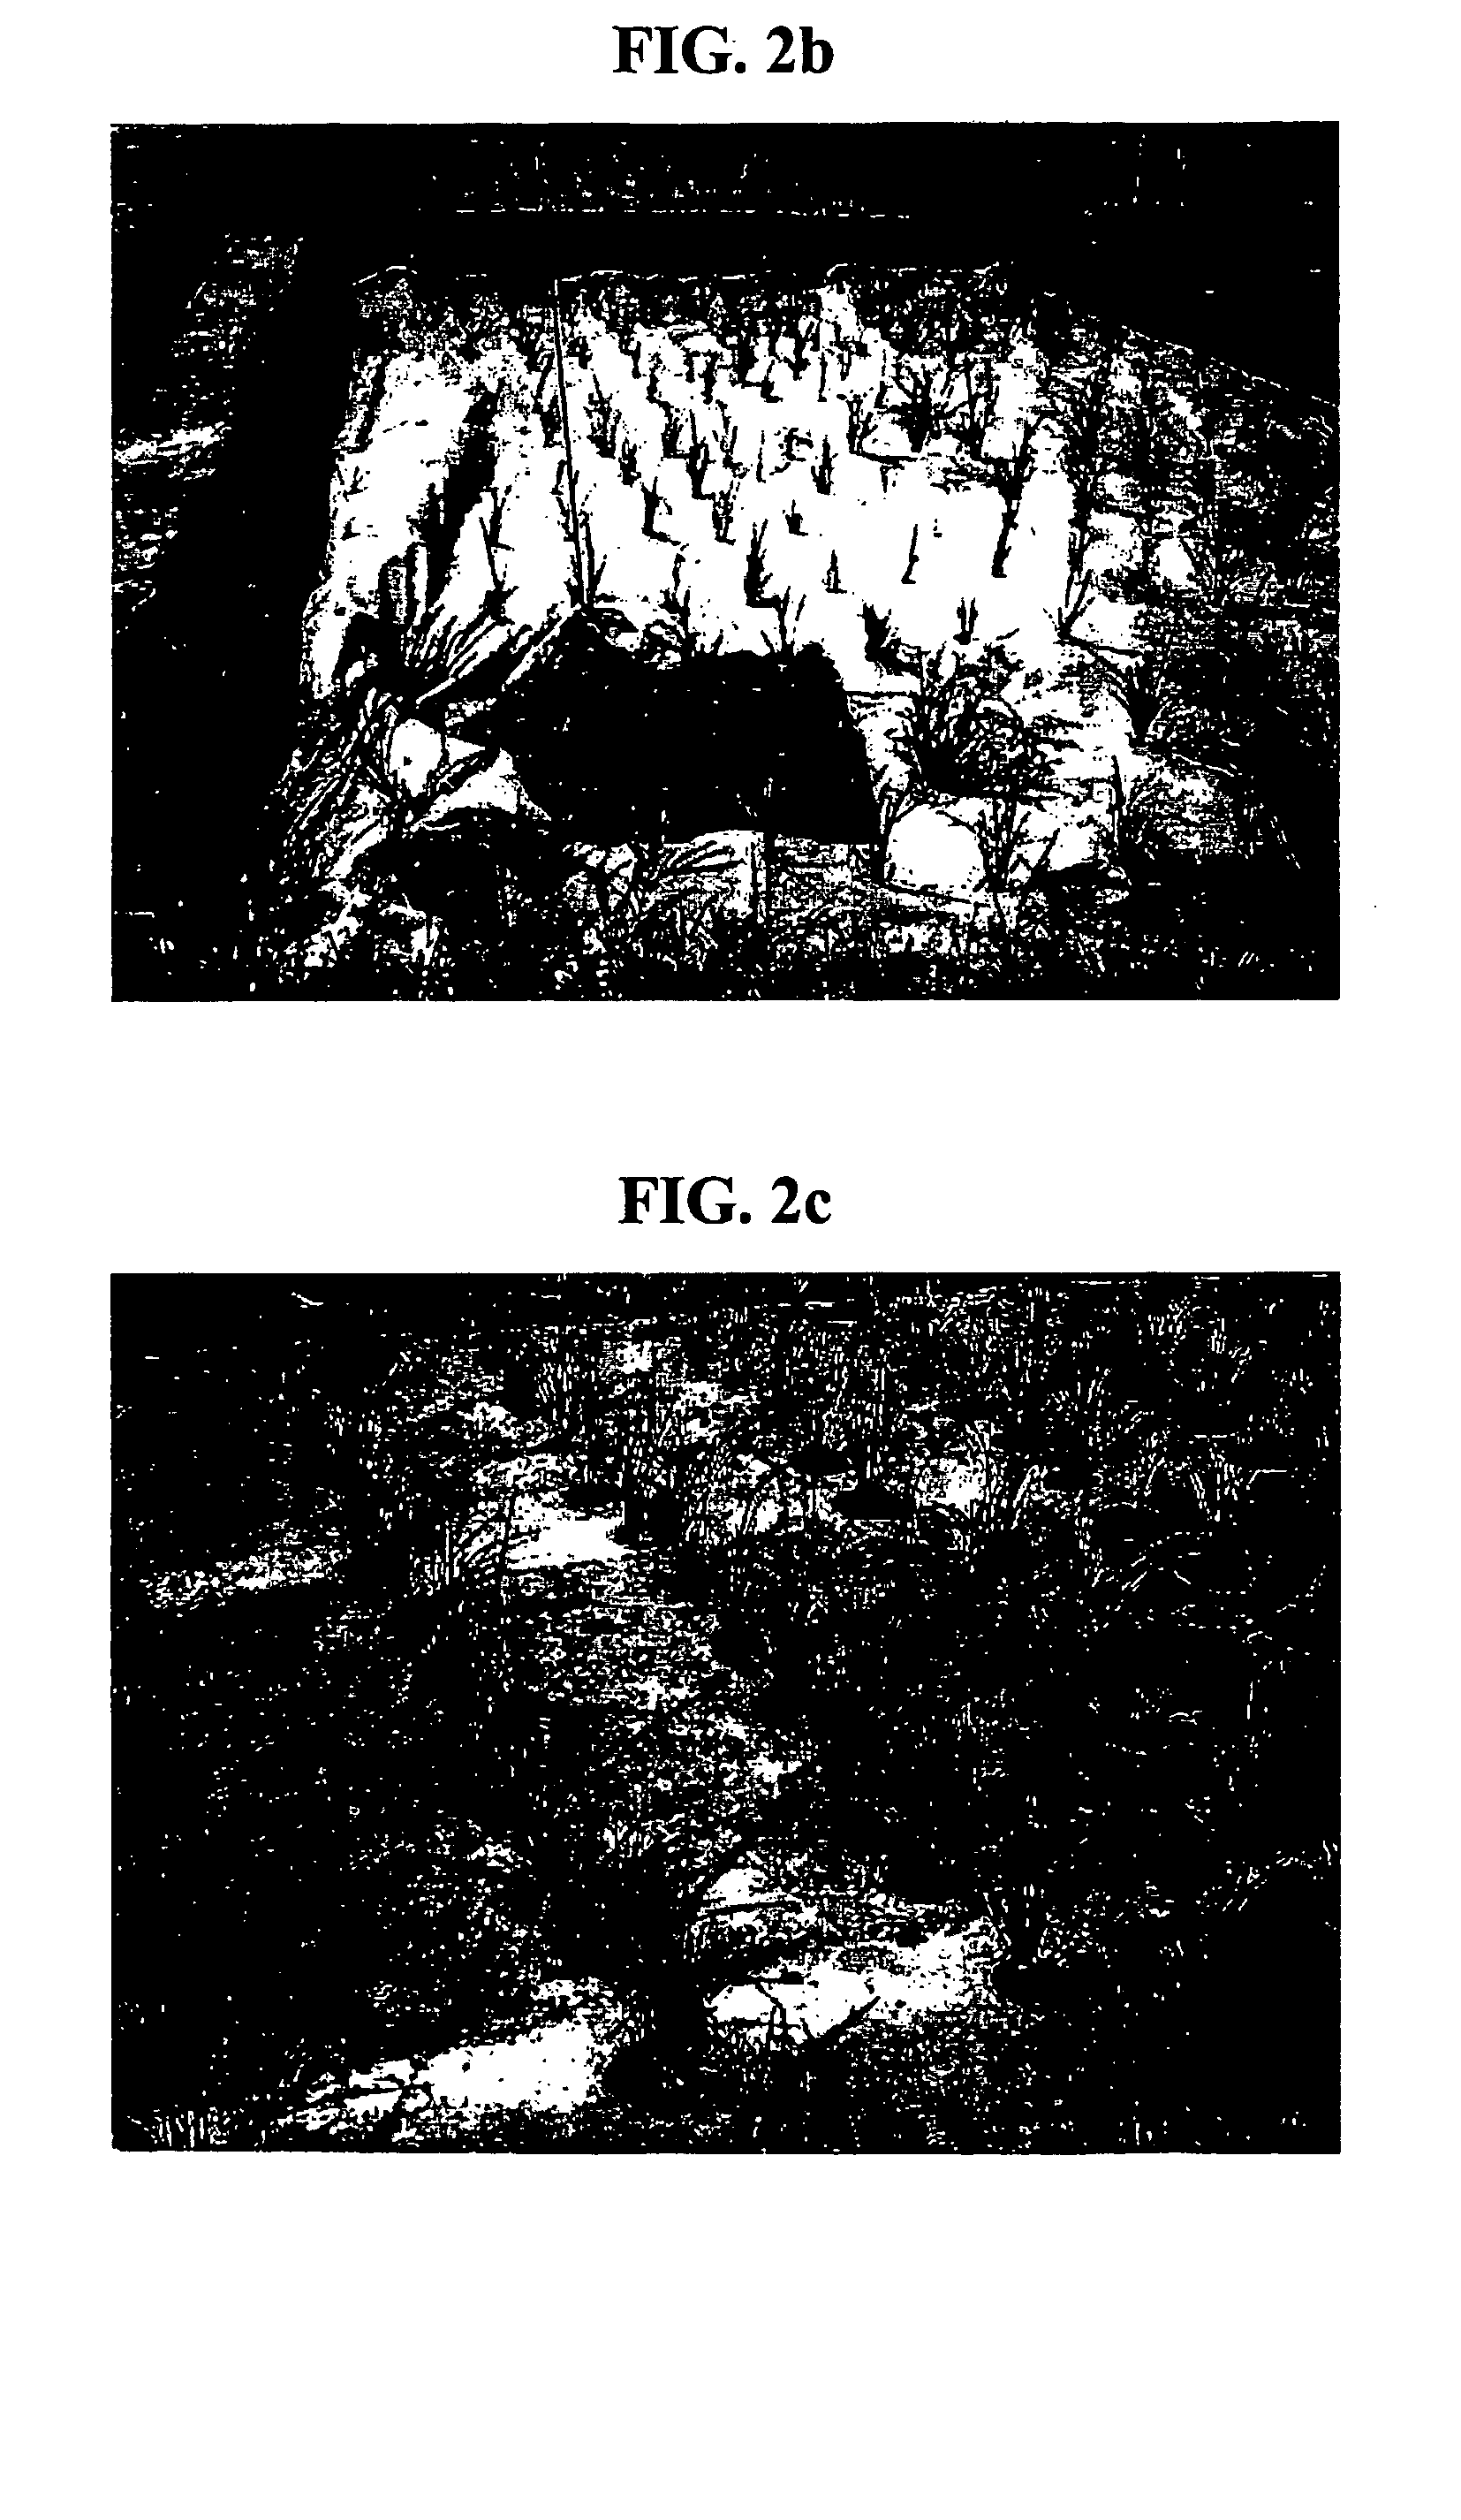 Biodegradable mulching-mat for preventing weeds and method for manufacturing the mat